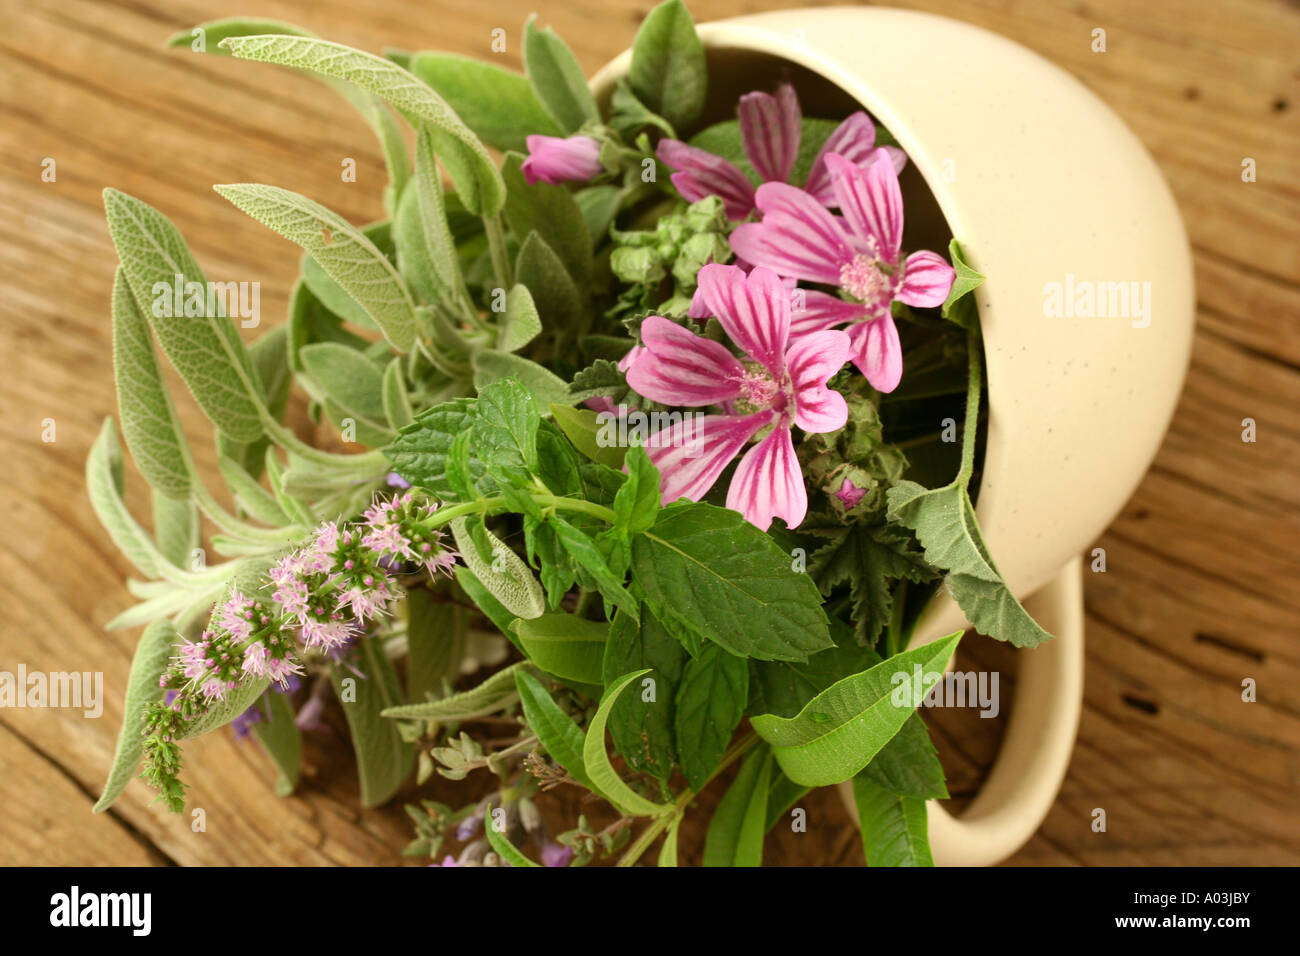 Medicinal herbs for infusion Stock Photo